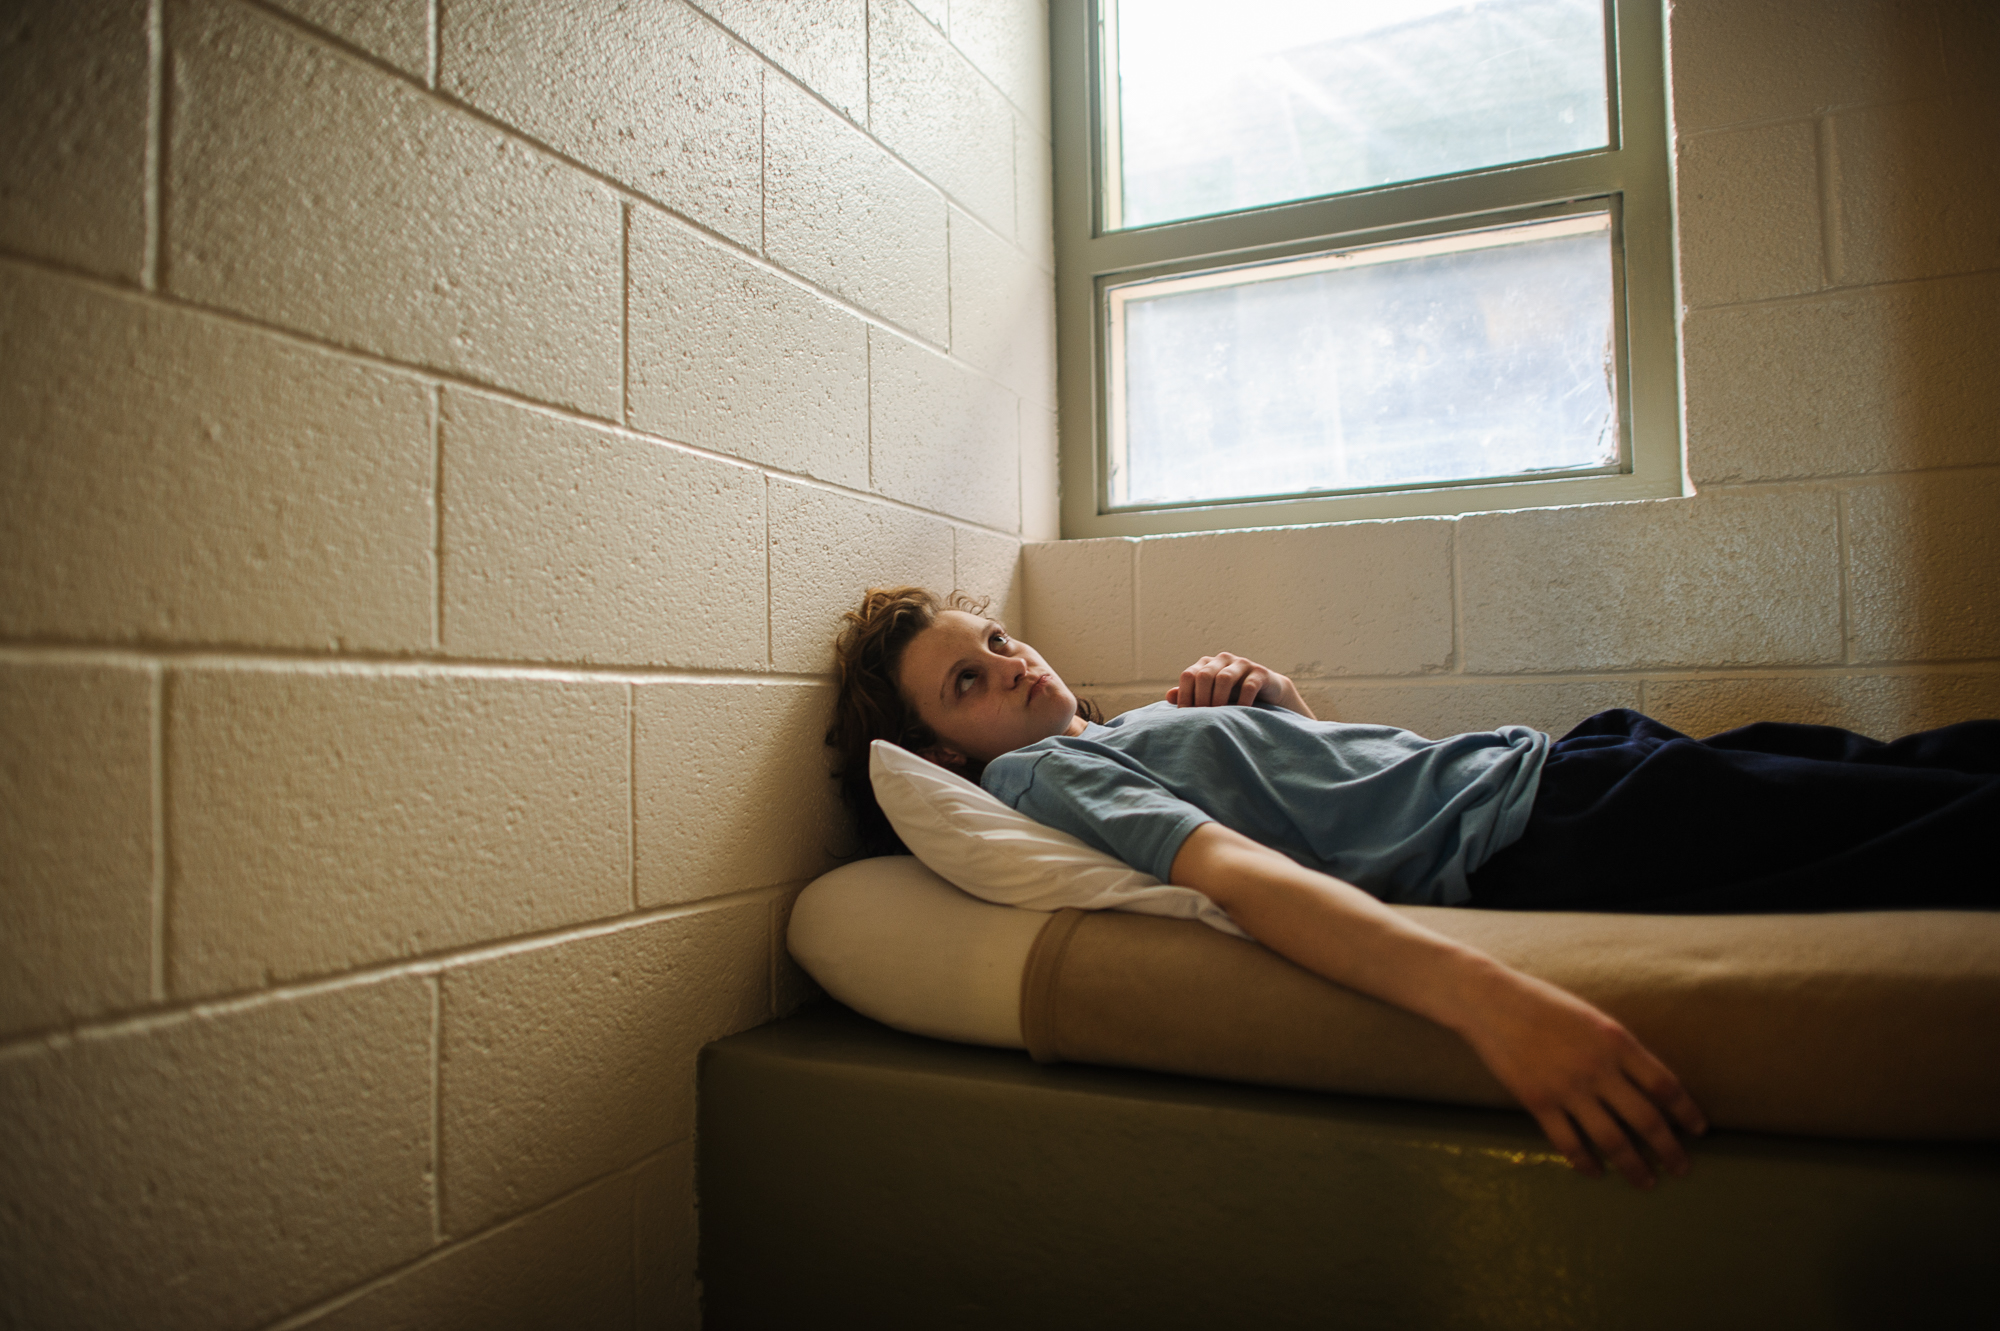  Alysia, age 16, lies on her bed in her cell at the juvenile detention center.  